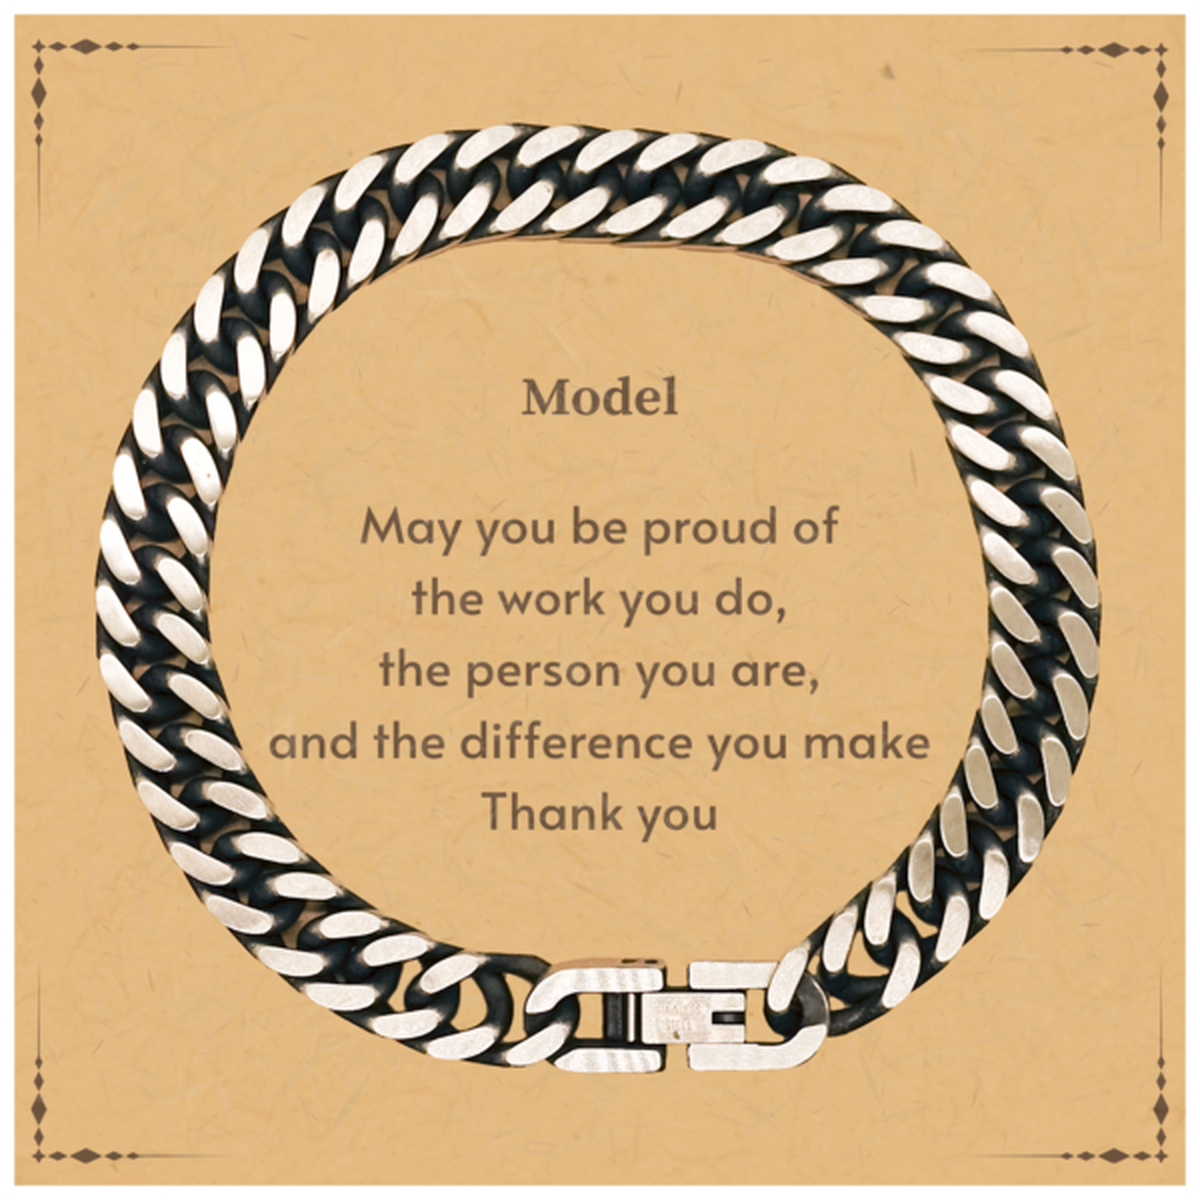 Heartwarming Cuban Link Chain Bracelet Retirement Coworkers Gifts for Model, Model May You be proud of the work you do, the person you are Gifts for Boss Men Women Friends